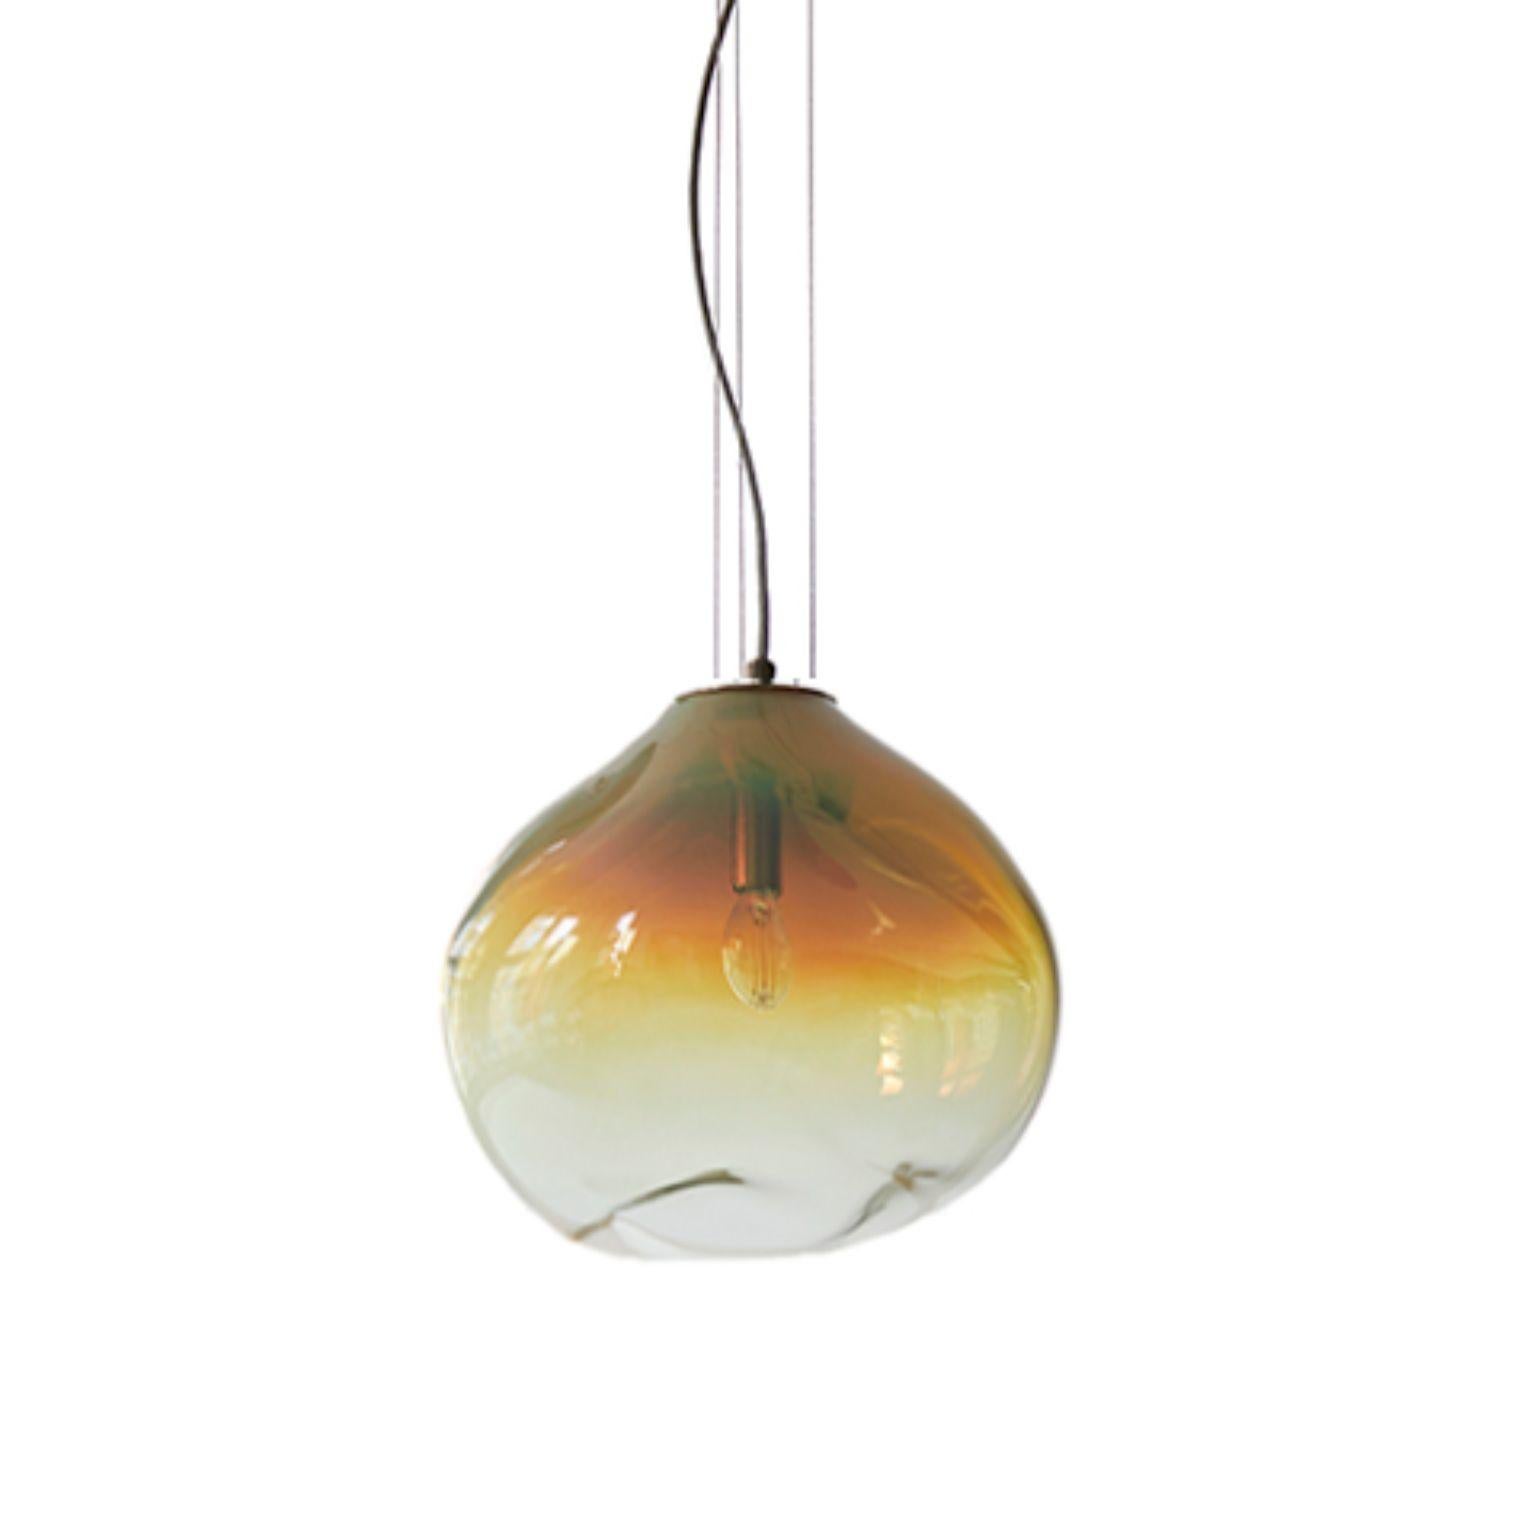 Set of 2 Haumea Amorph Amber Iridescent XL Pendants by Eloa In New Condition For Sale In Geneve, CH